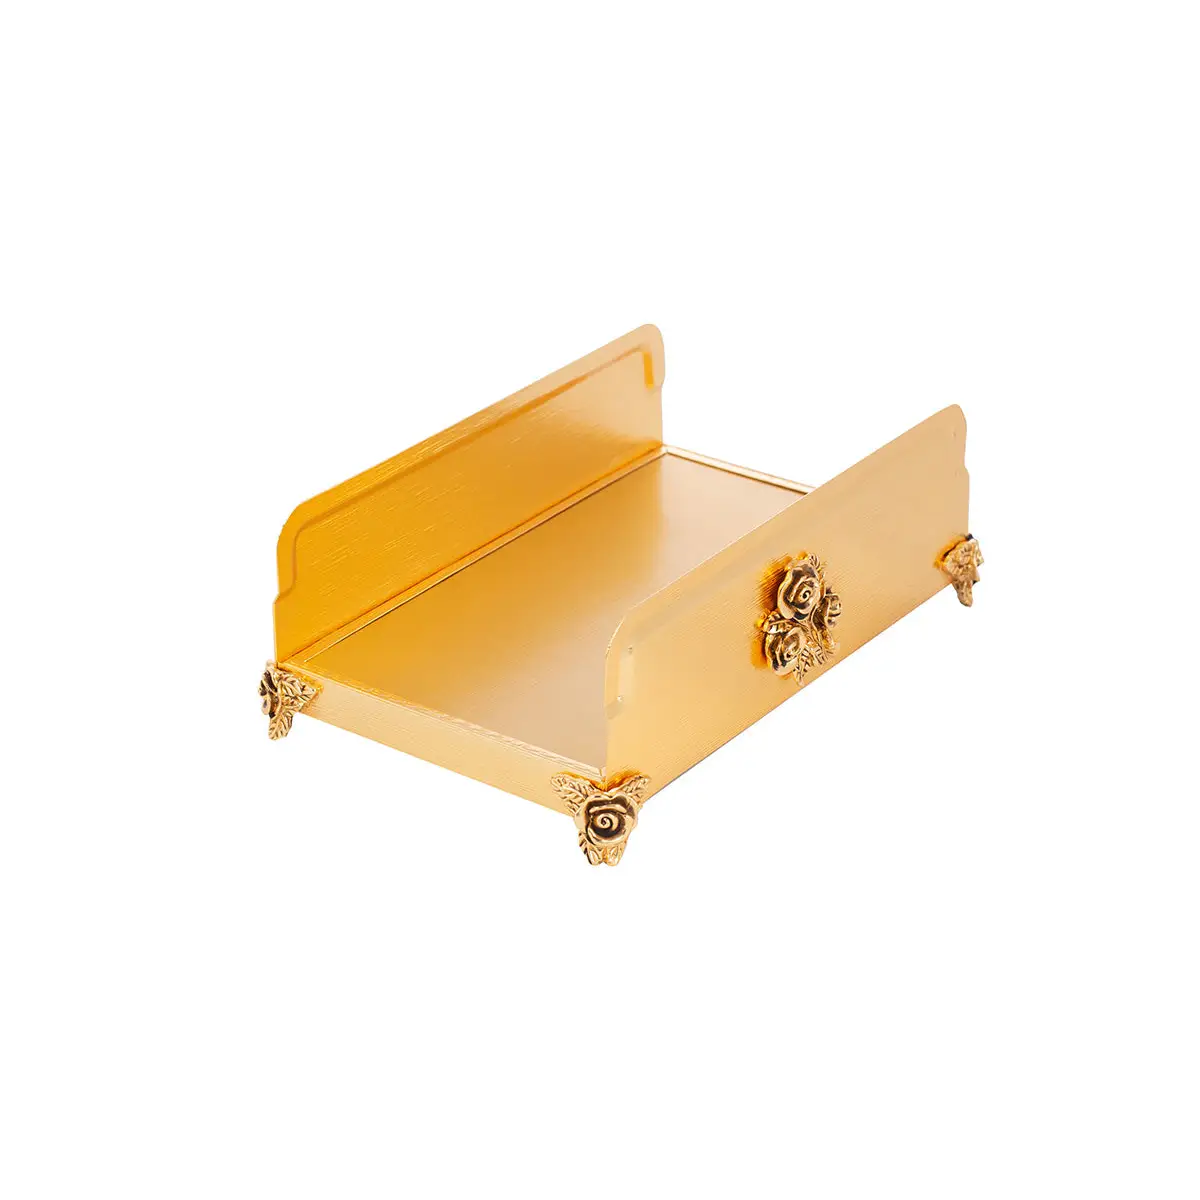 GOLD PLATED TOWEL HOLDER - ROSE COLLECTION